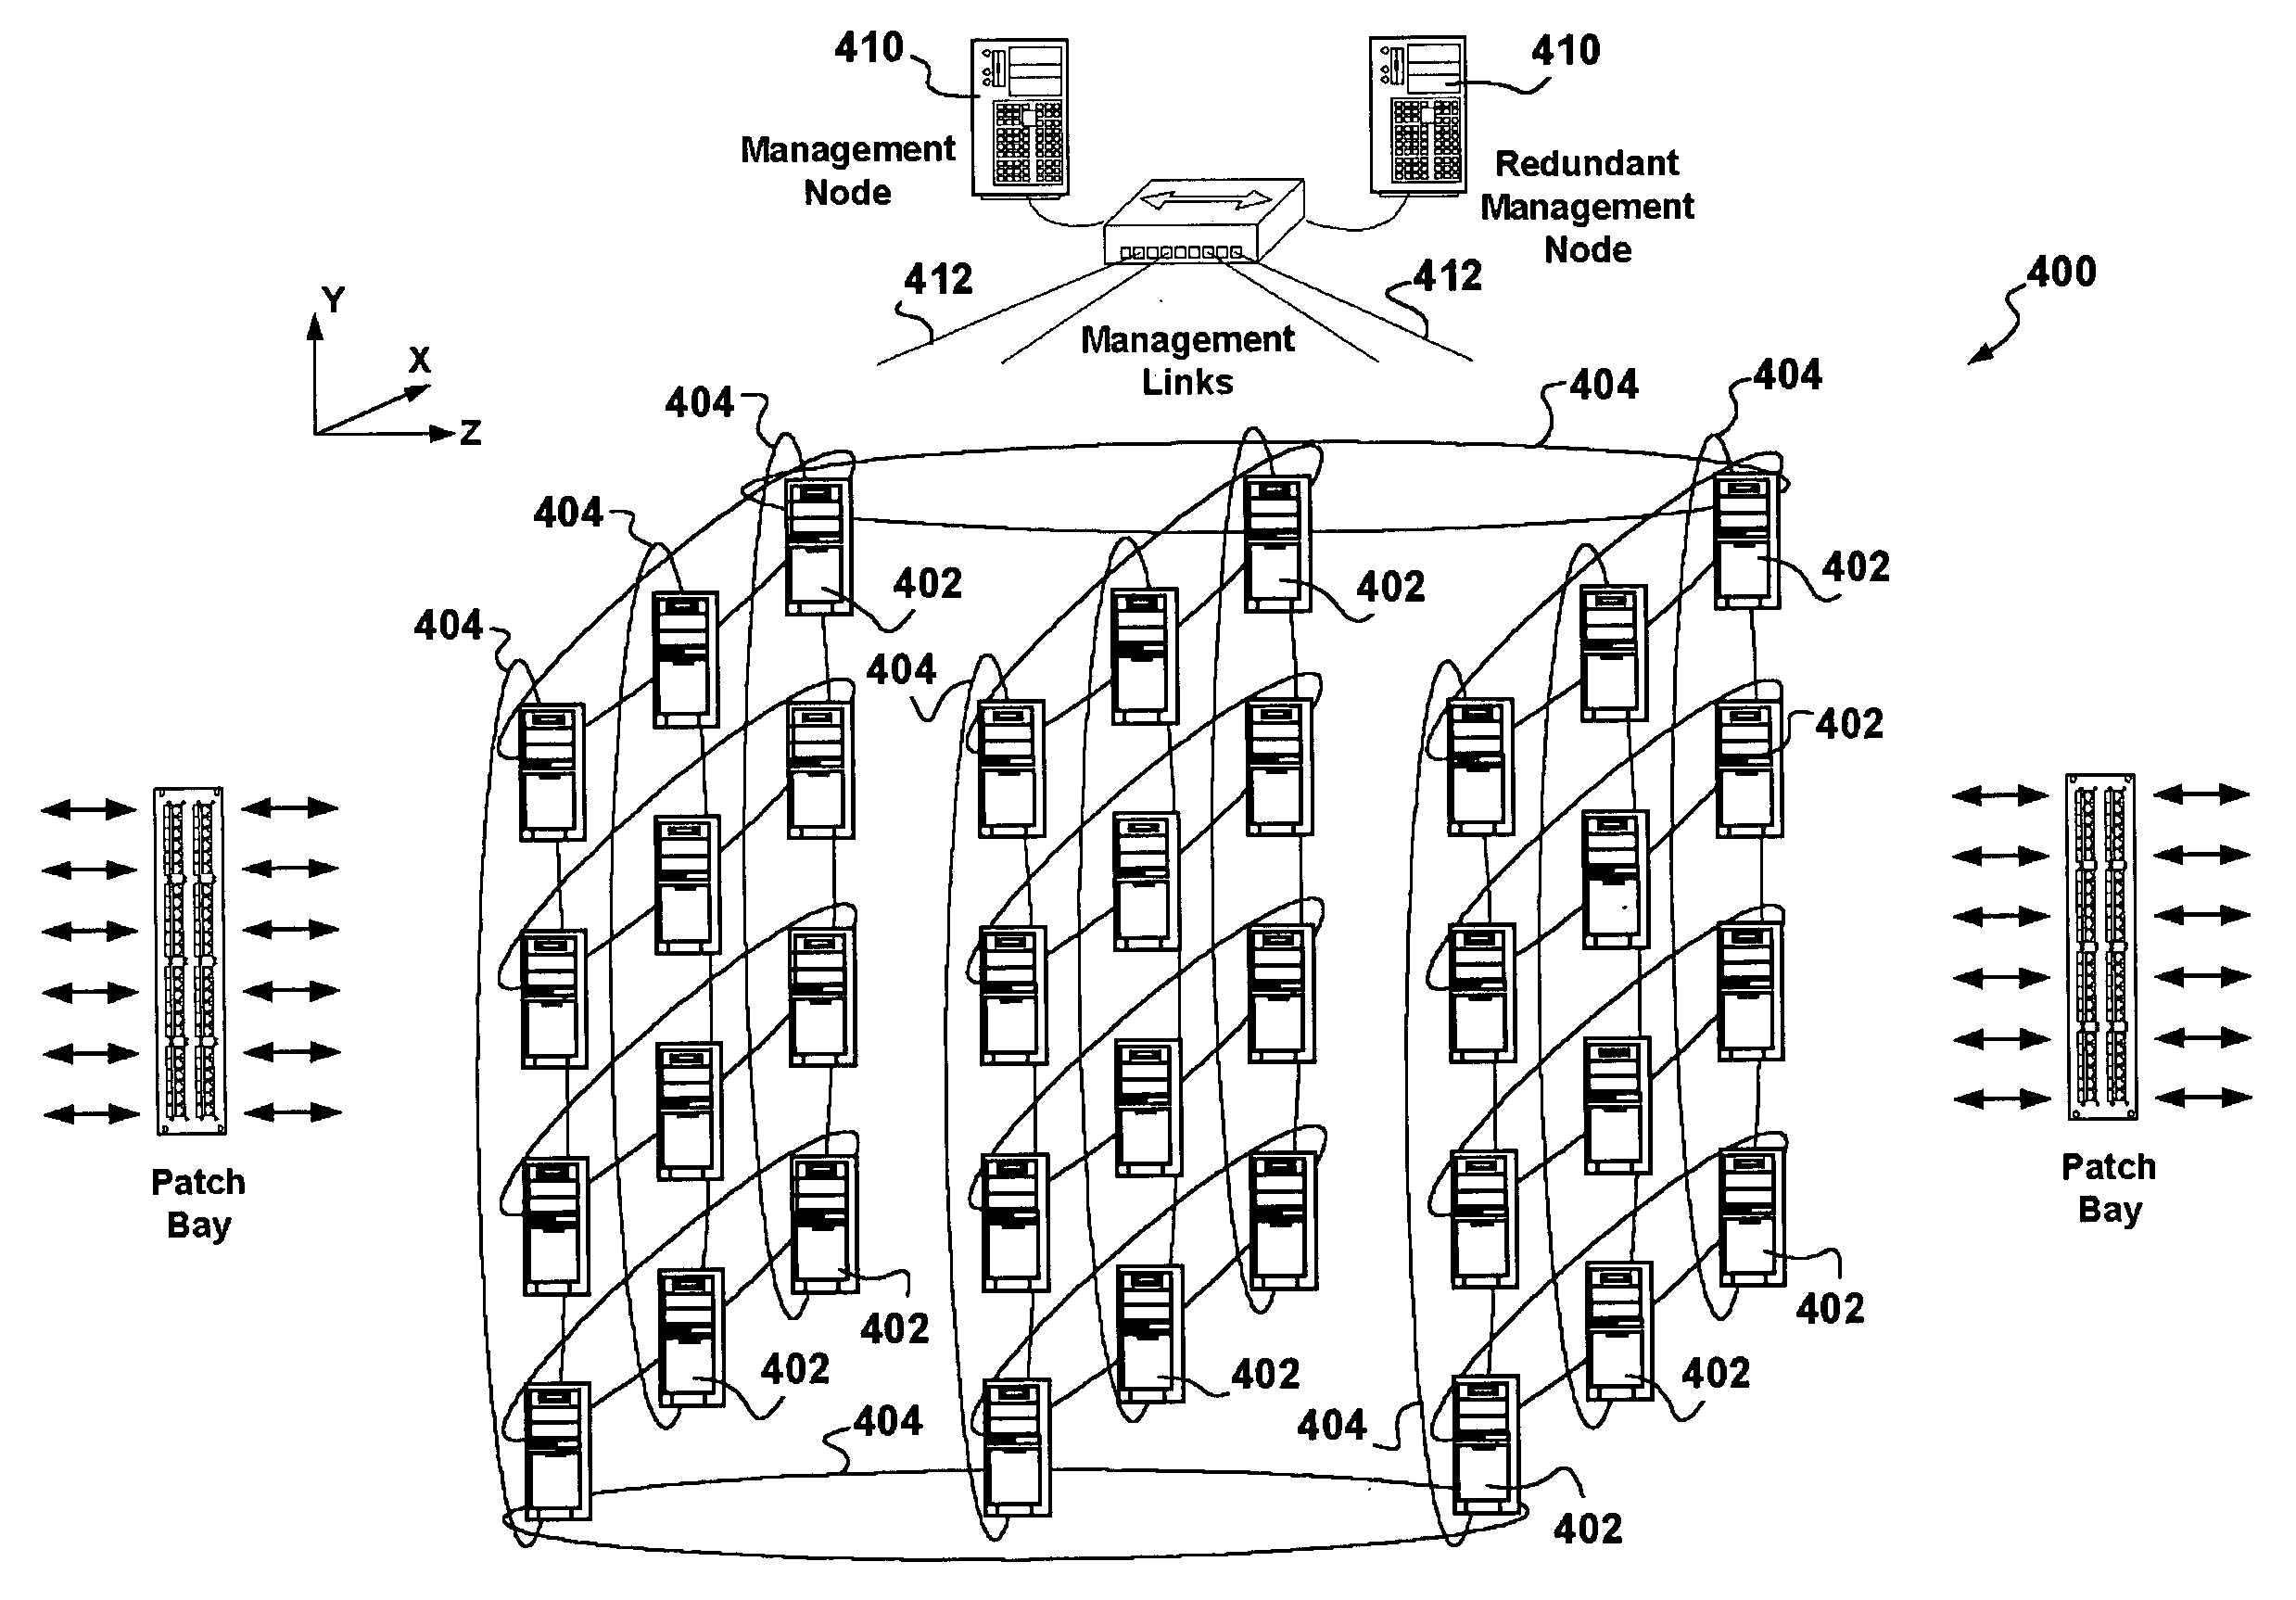 Software configurable cluster-based router using stock personal computers as cluster nodes